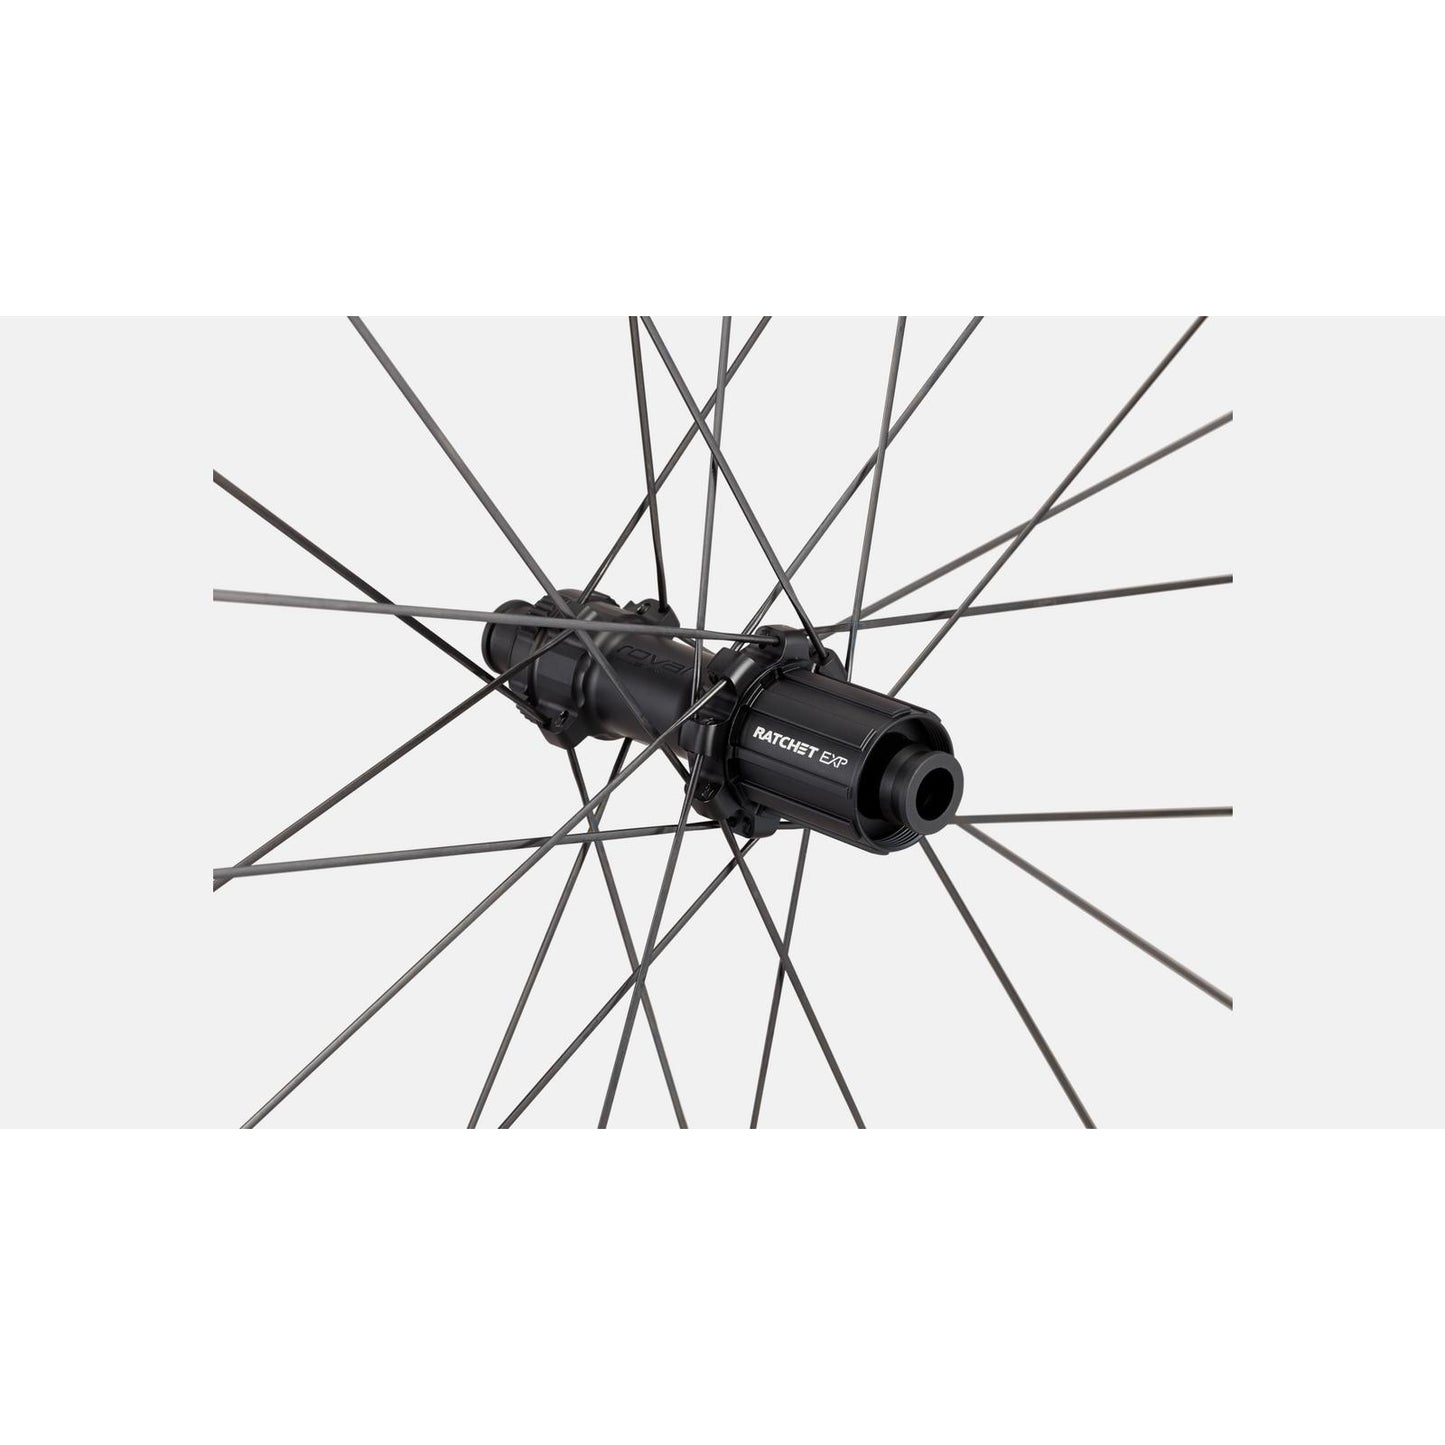 Specialized Terra CLX II - Bicycle Rims - Bicycle Warehouse